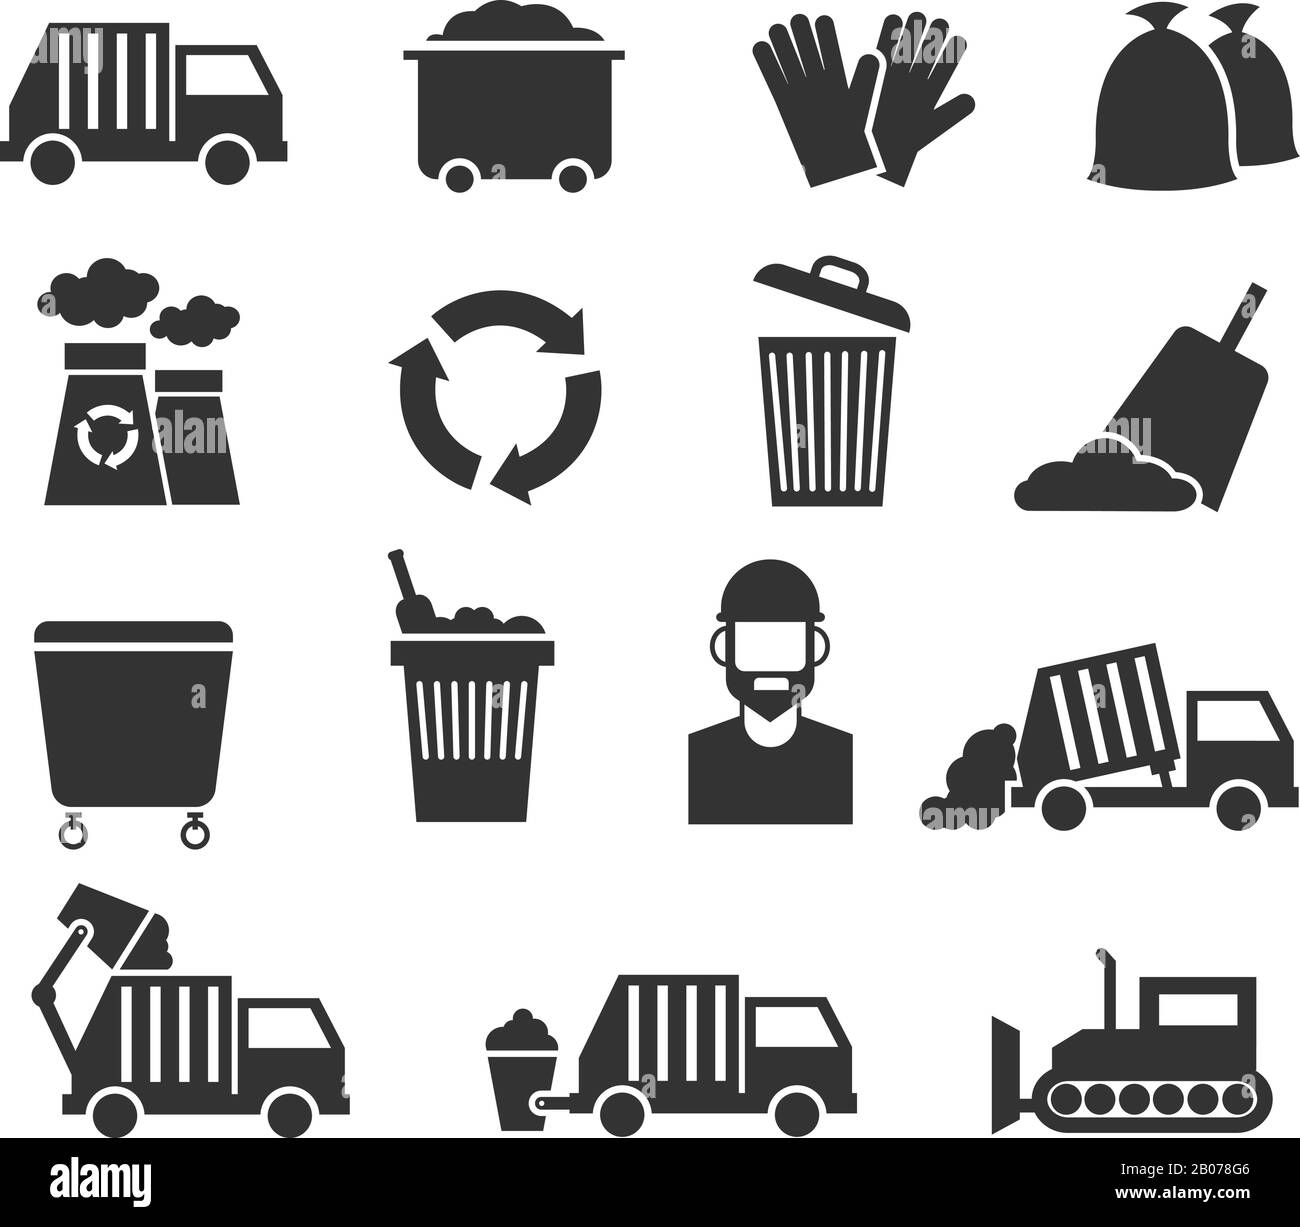 Trash recycle garbage waste vector icons. Container for junk and waste processing plant illustration Stock Vector